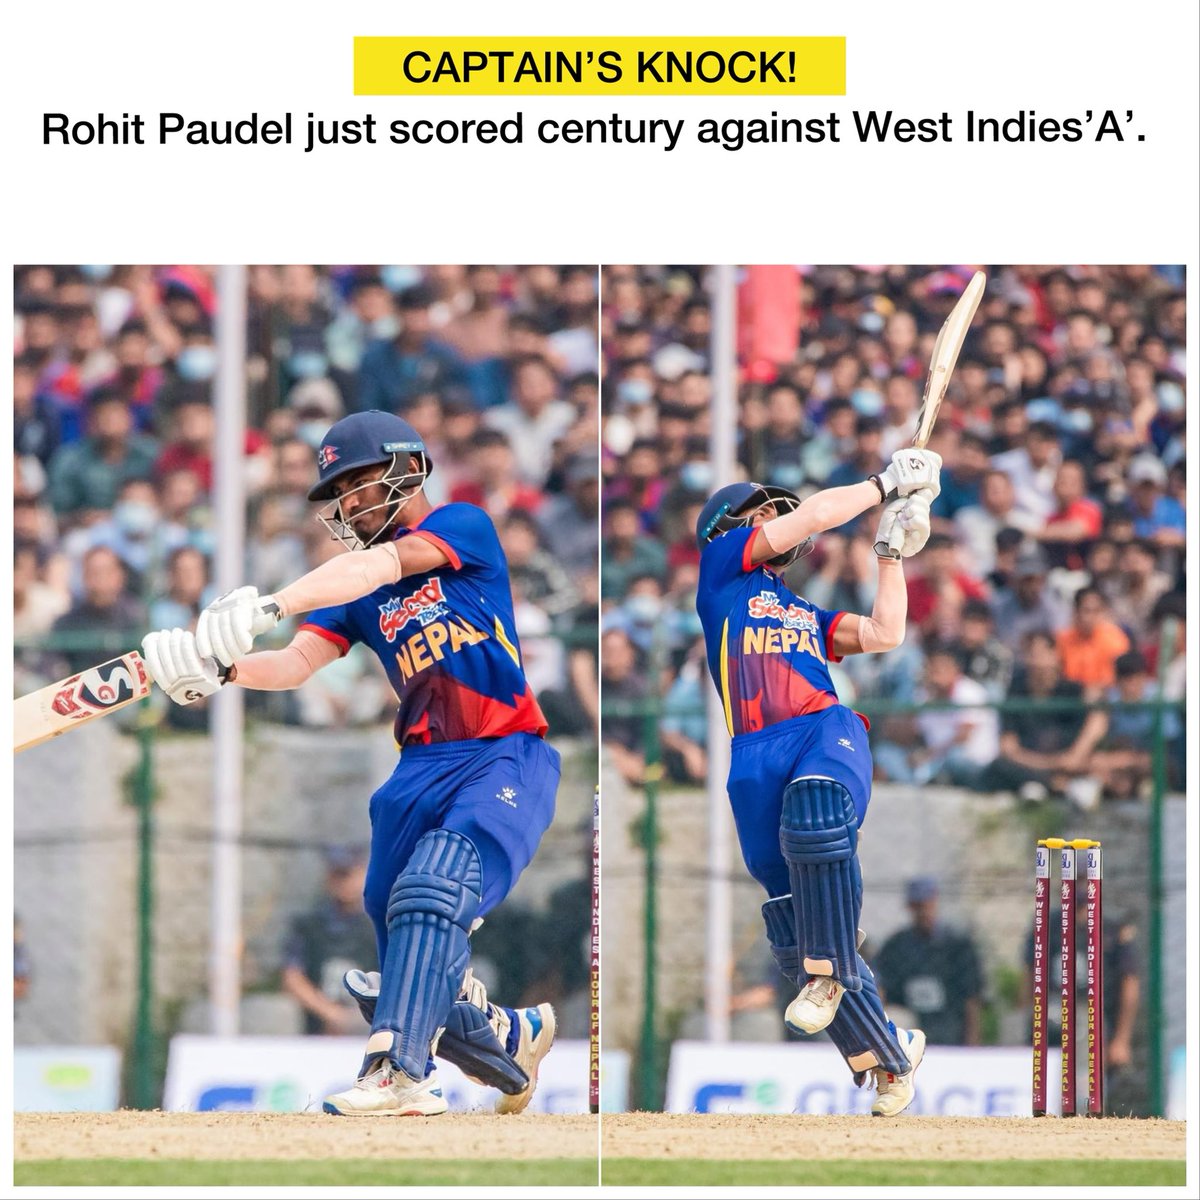 BREAKING: Skipper Rohit Paudel has scored a century against West Indies ‘A’. He achieved his quick 100 in just 47 balls. Congratulations, Captain Cool. 😎

#RohitPaudel #Nepal #century #cricket #nonextquestion